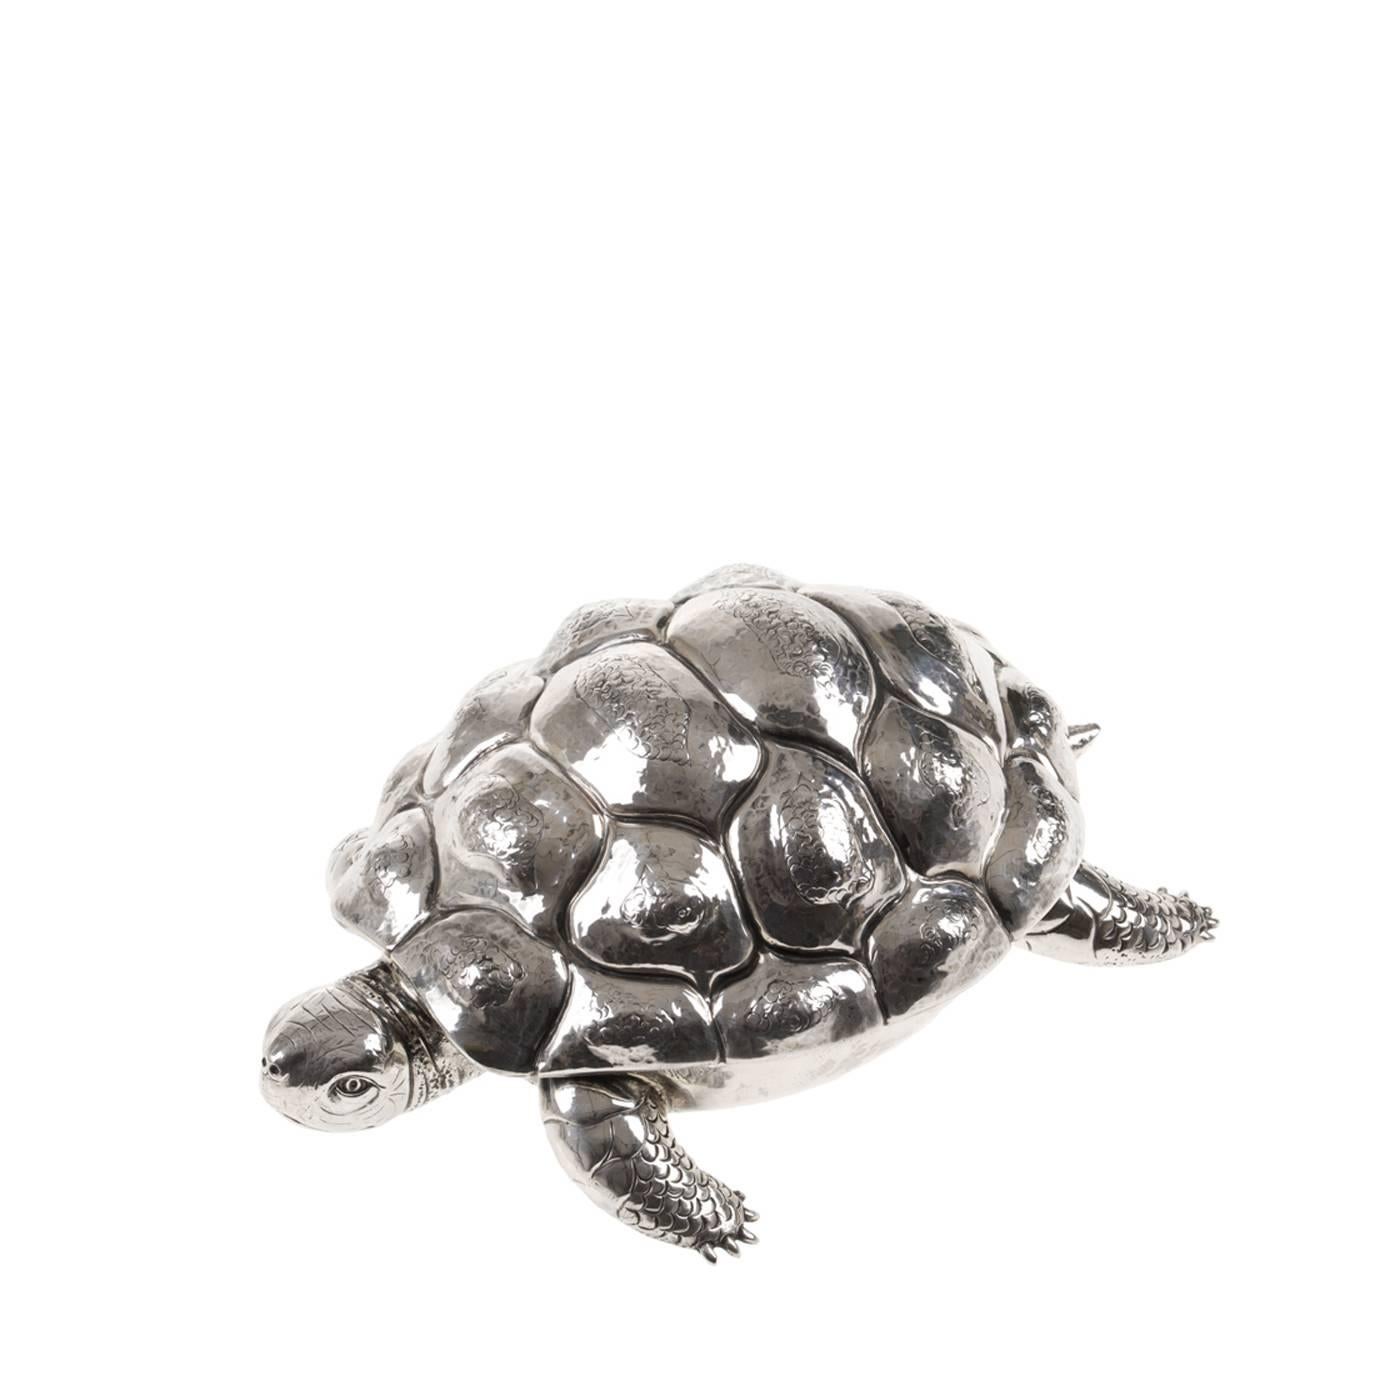 Elaborate workmanship imbues this ornate box shaped like a turtle with indelible character. Entirely handcrafted from sterling silver by Florentine artisan silversmith house Fratelli Lisi, this piece is embossed and engraved by hand to achieve the